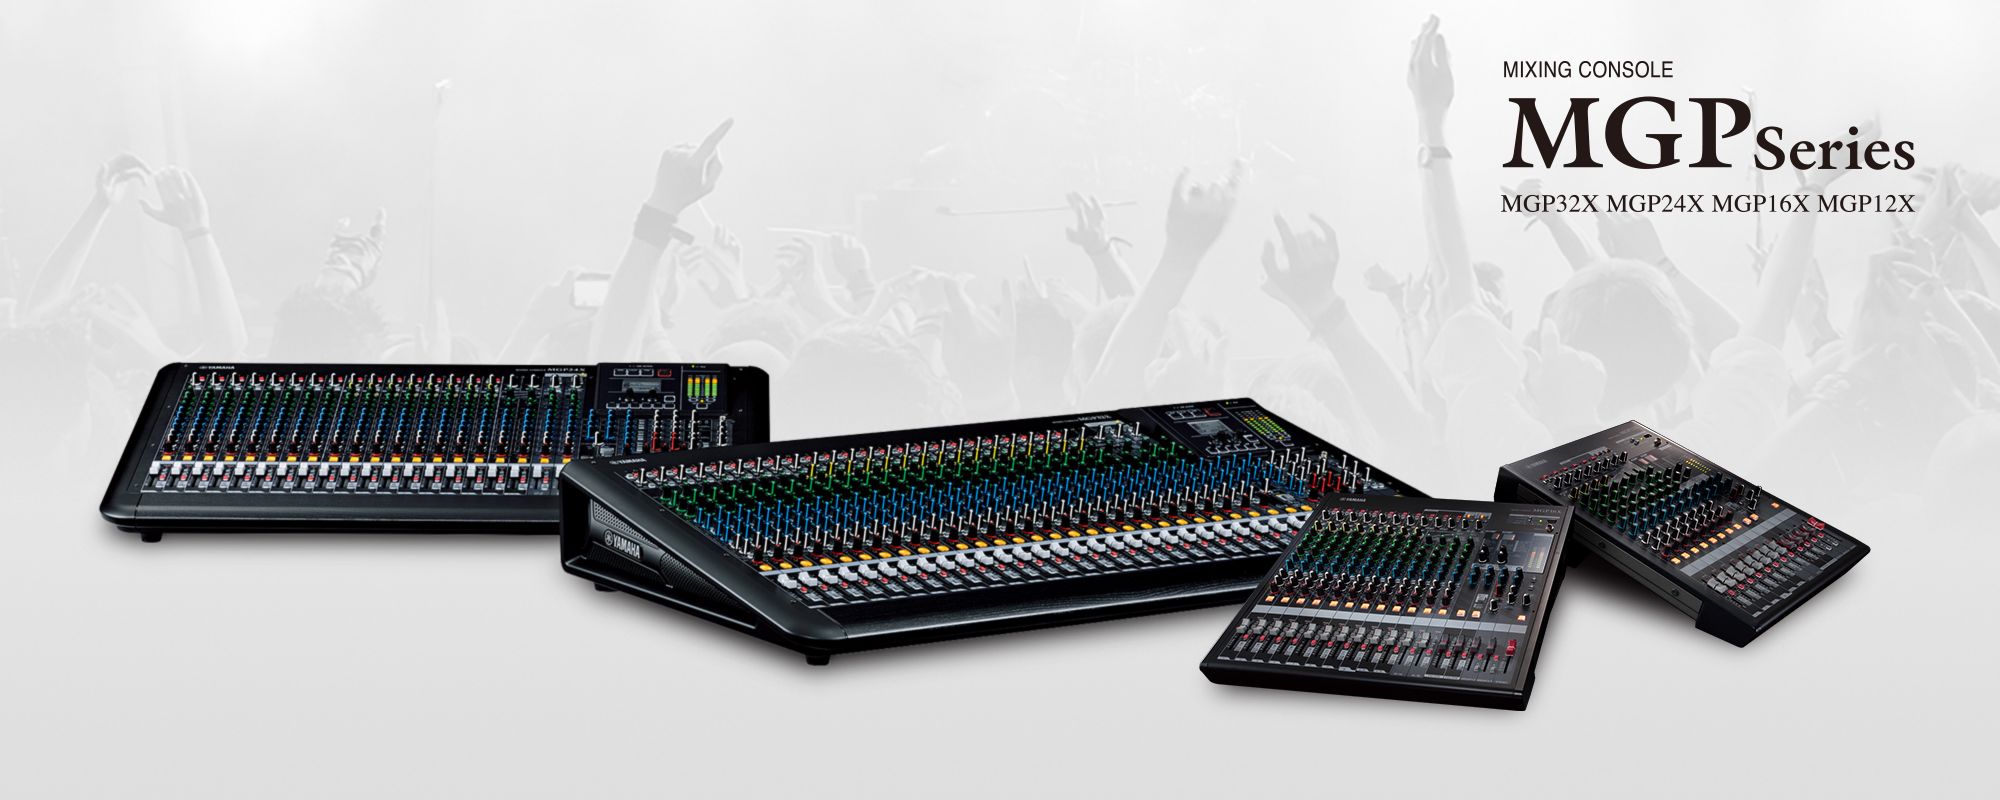 MGP Series - Specs - Mixers - Professional Audio - Products ...